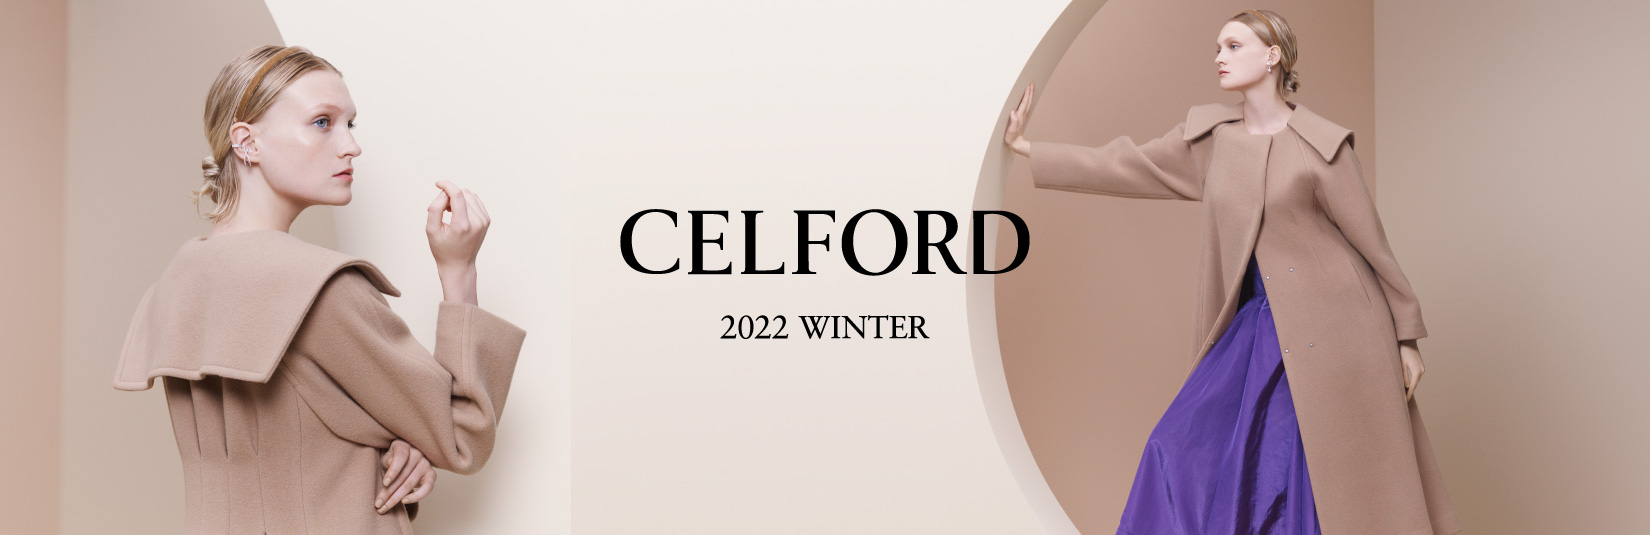 CELFORD Autumn Winter 2nd Collection